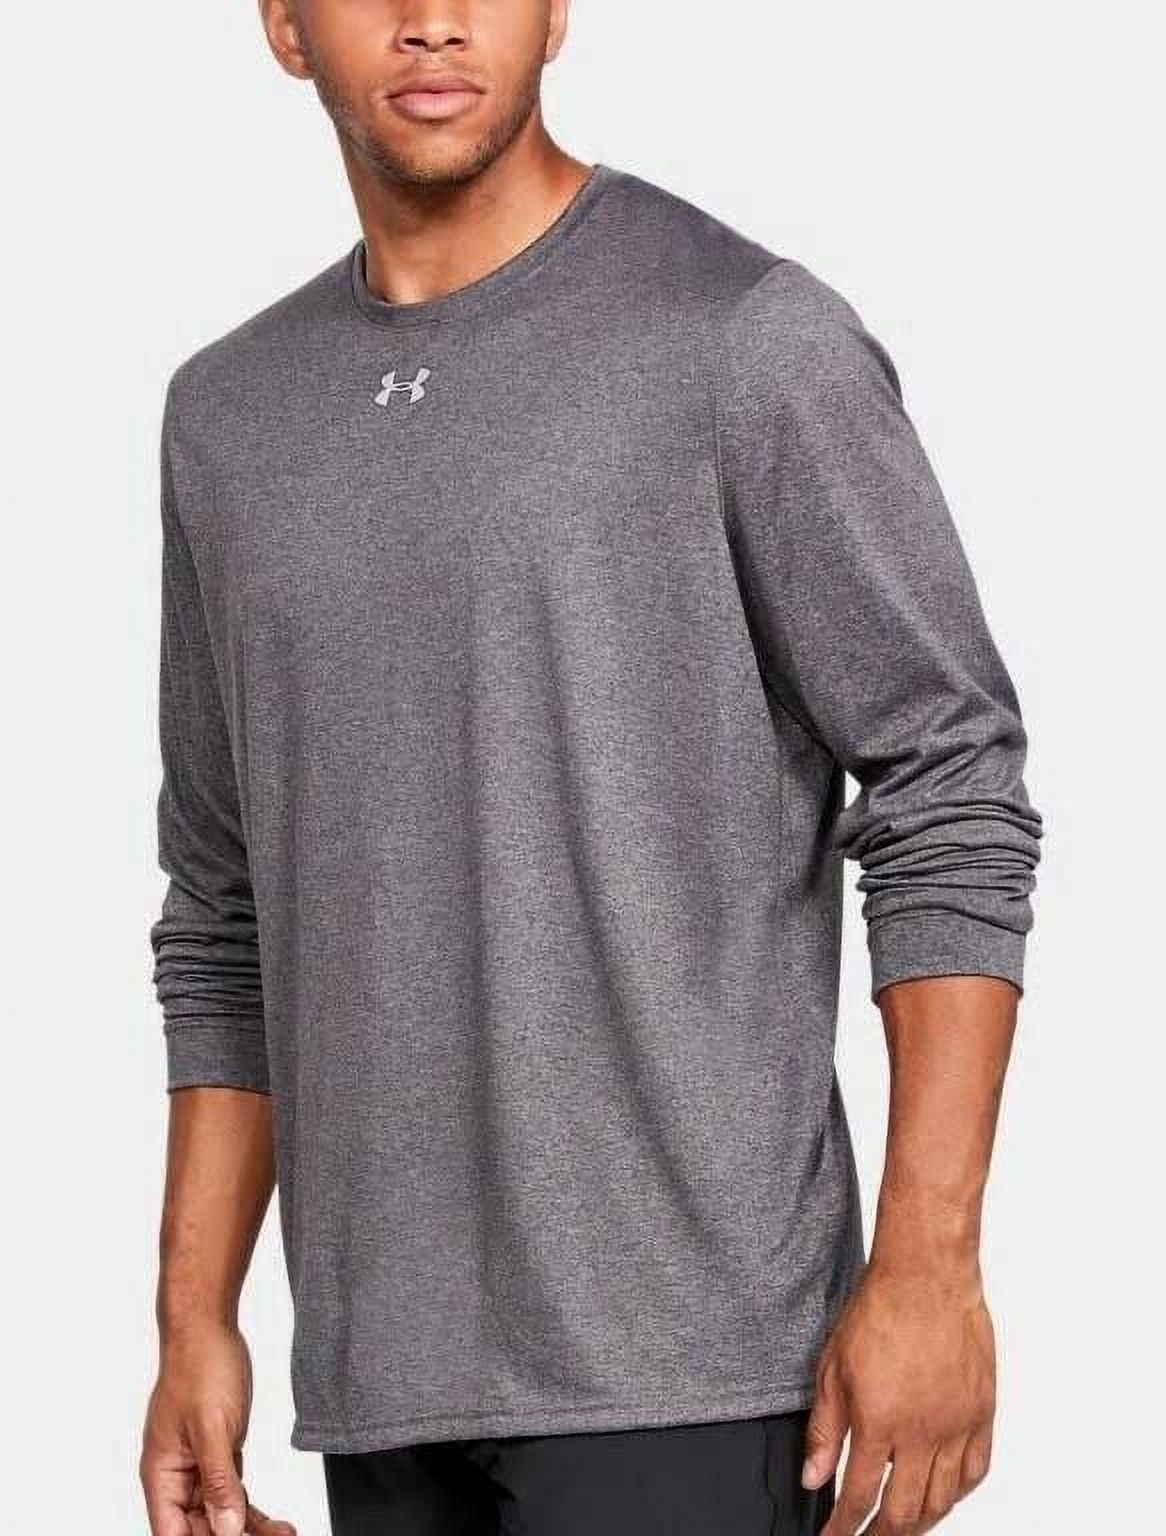 NWT Under Armour Mens SZ MED All Season Gear Loose Fit Blue/ Gray Thermal  Shirt